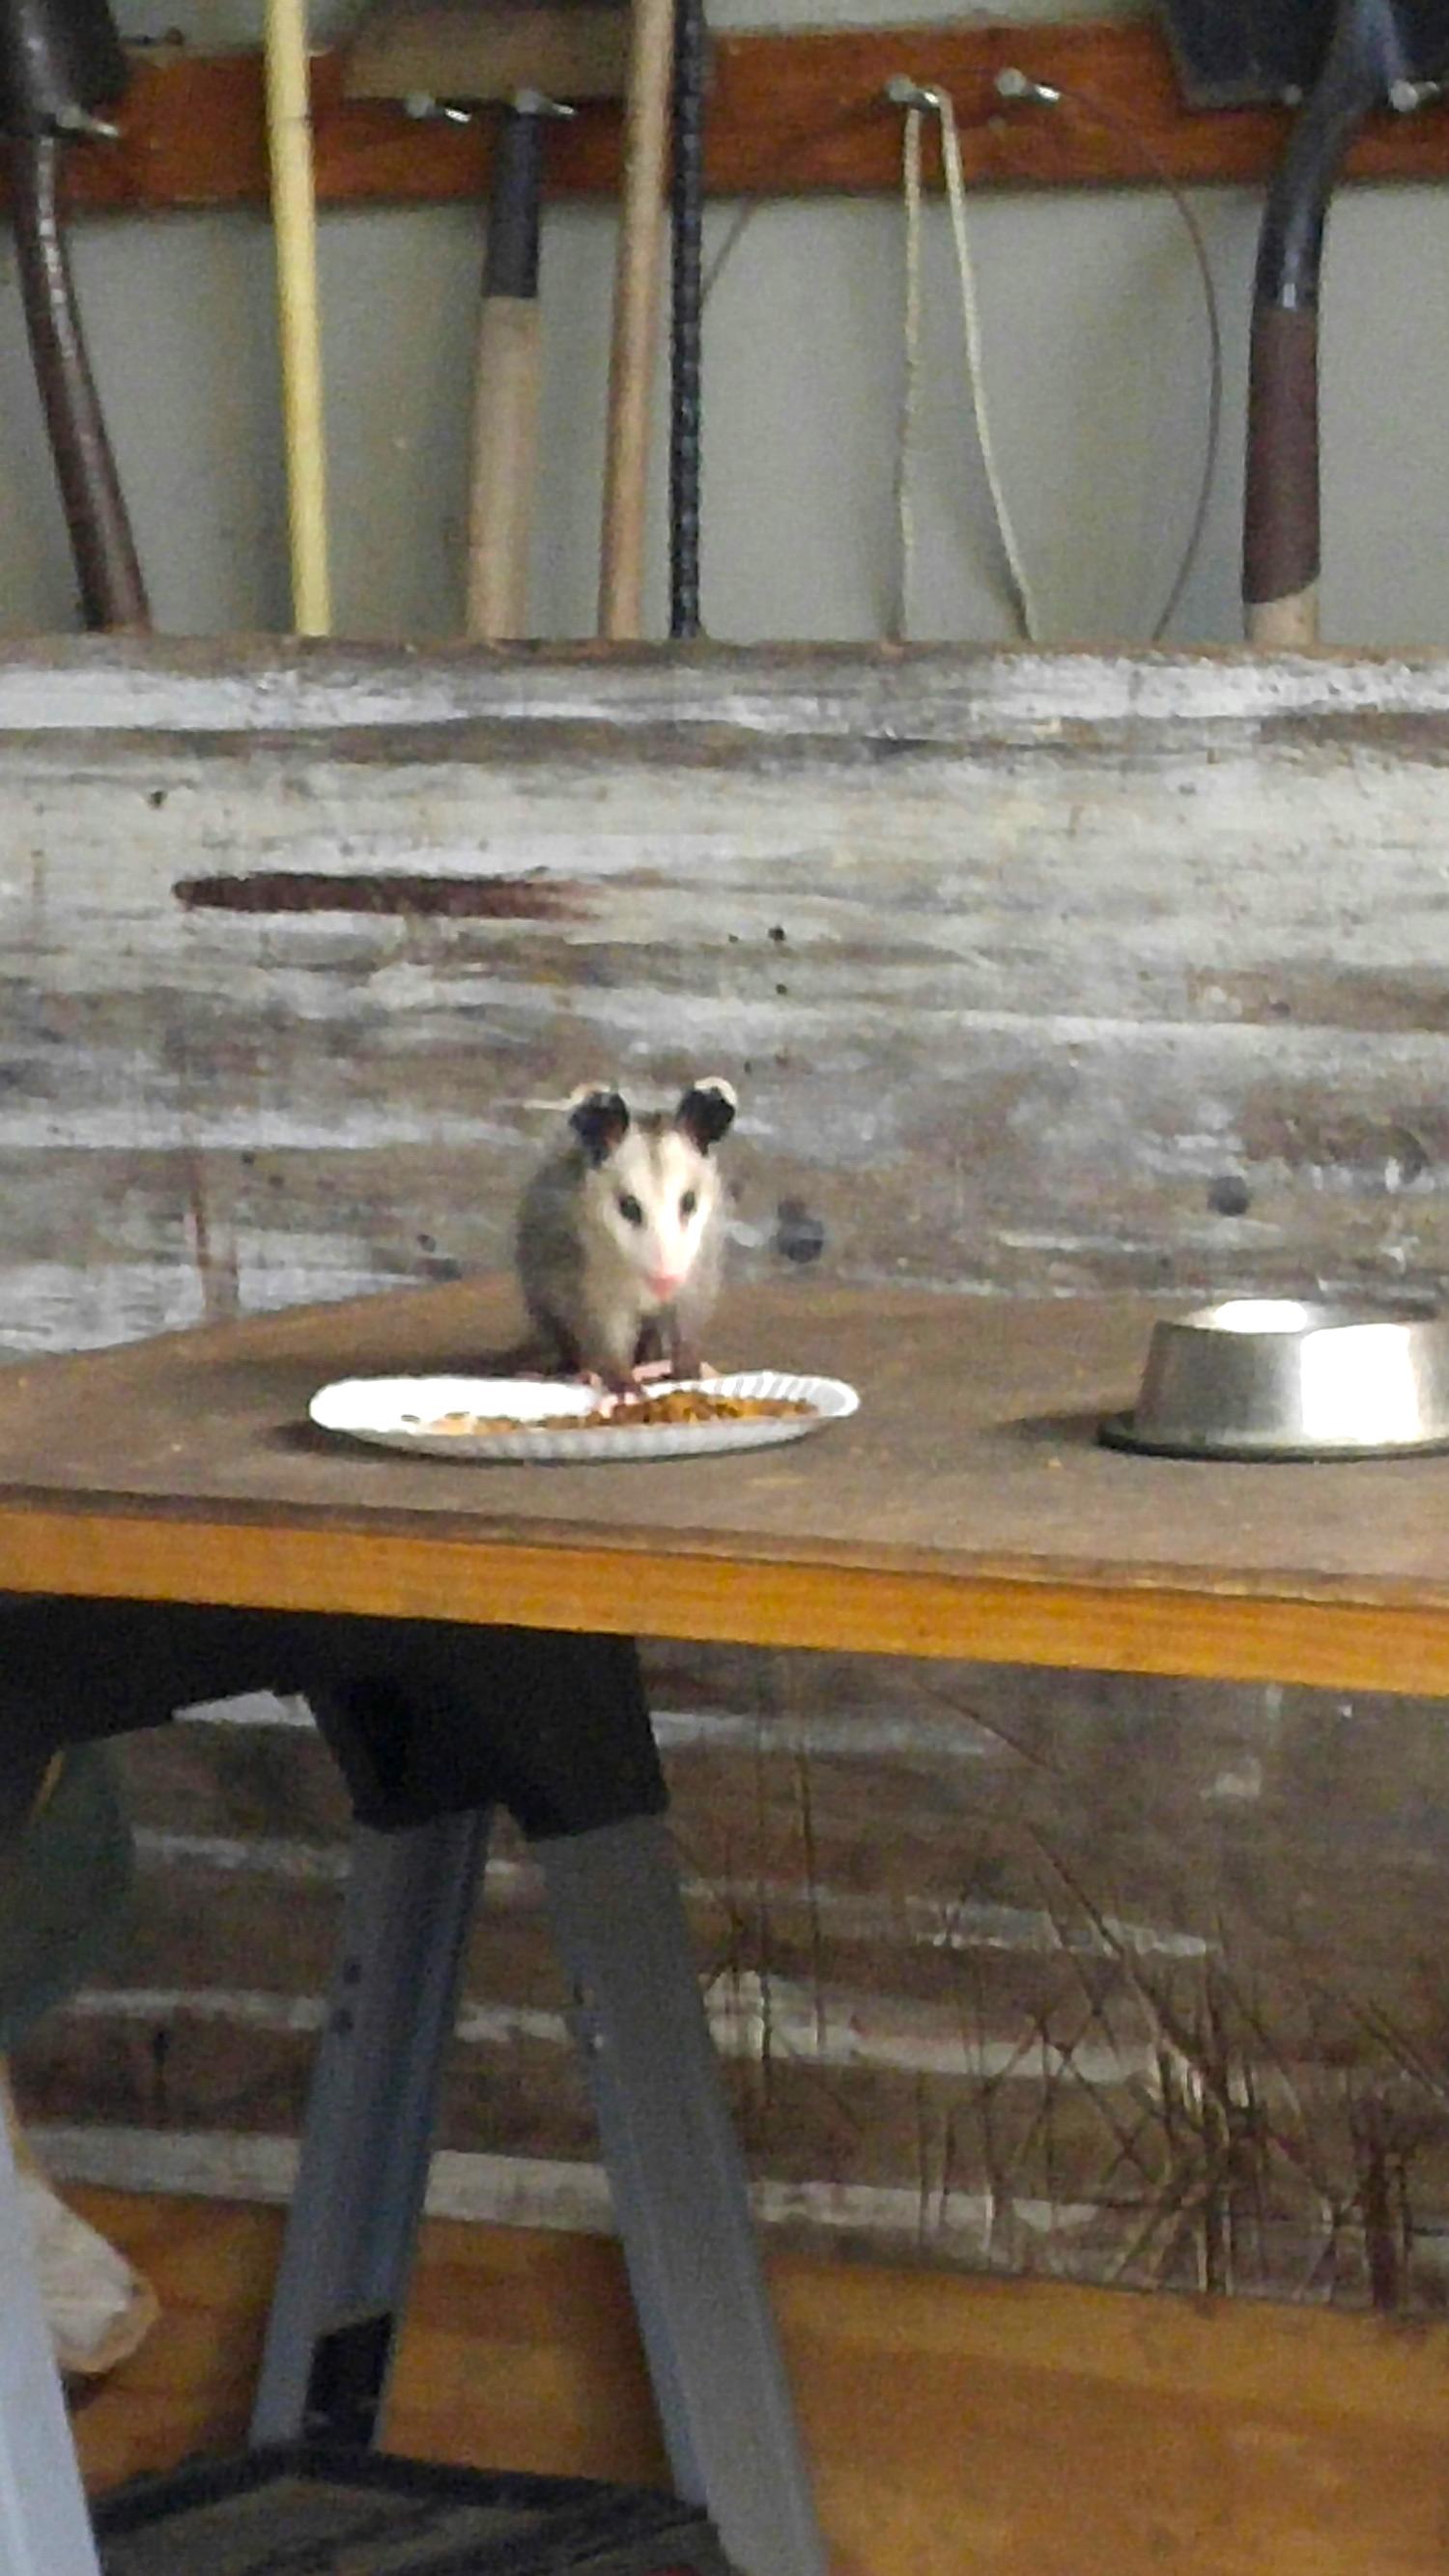 Opossums are cute